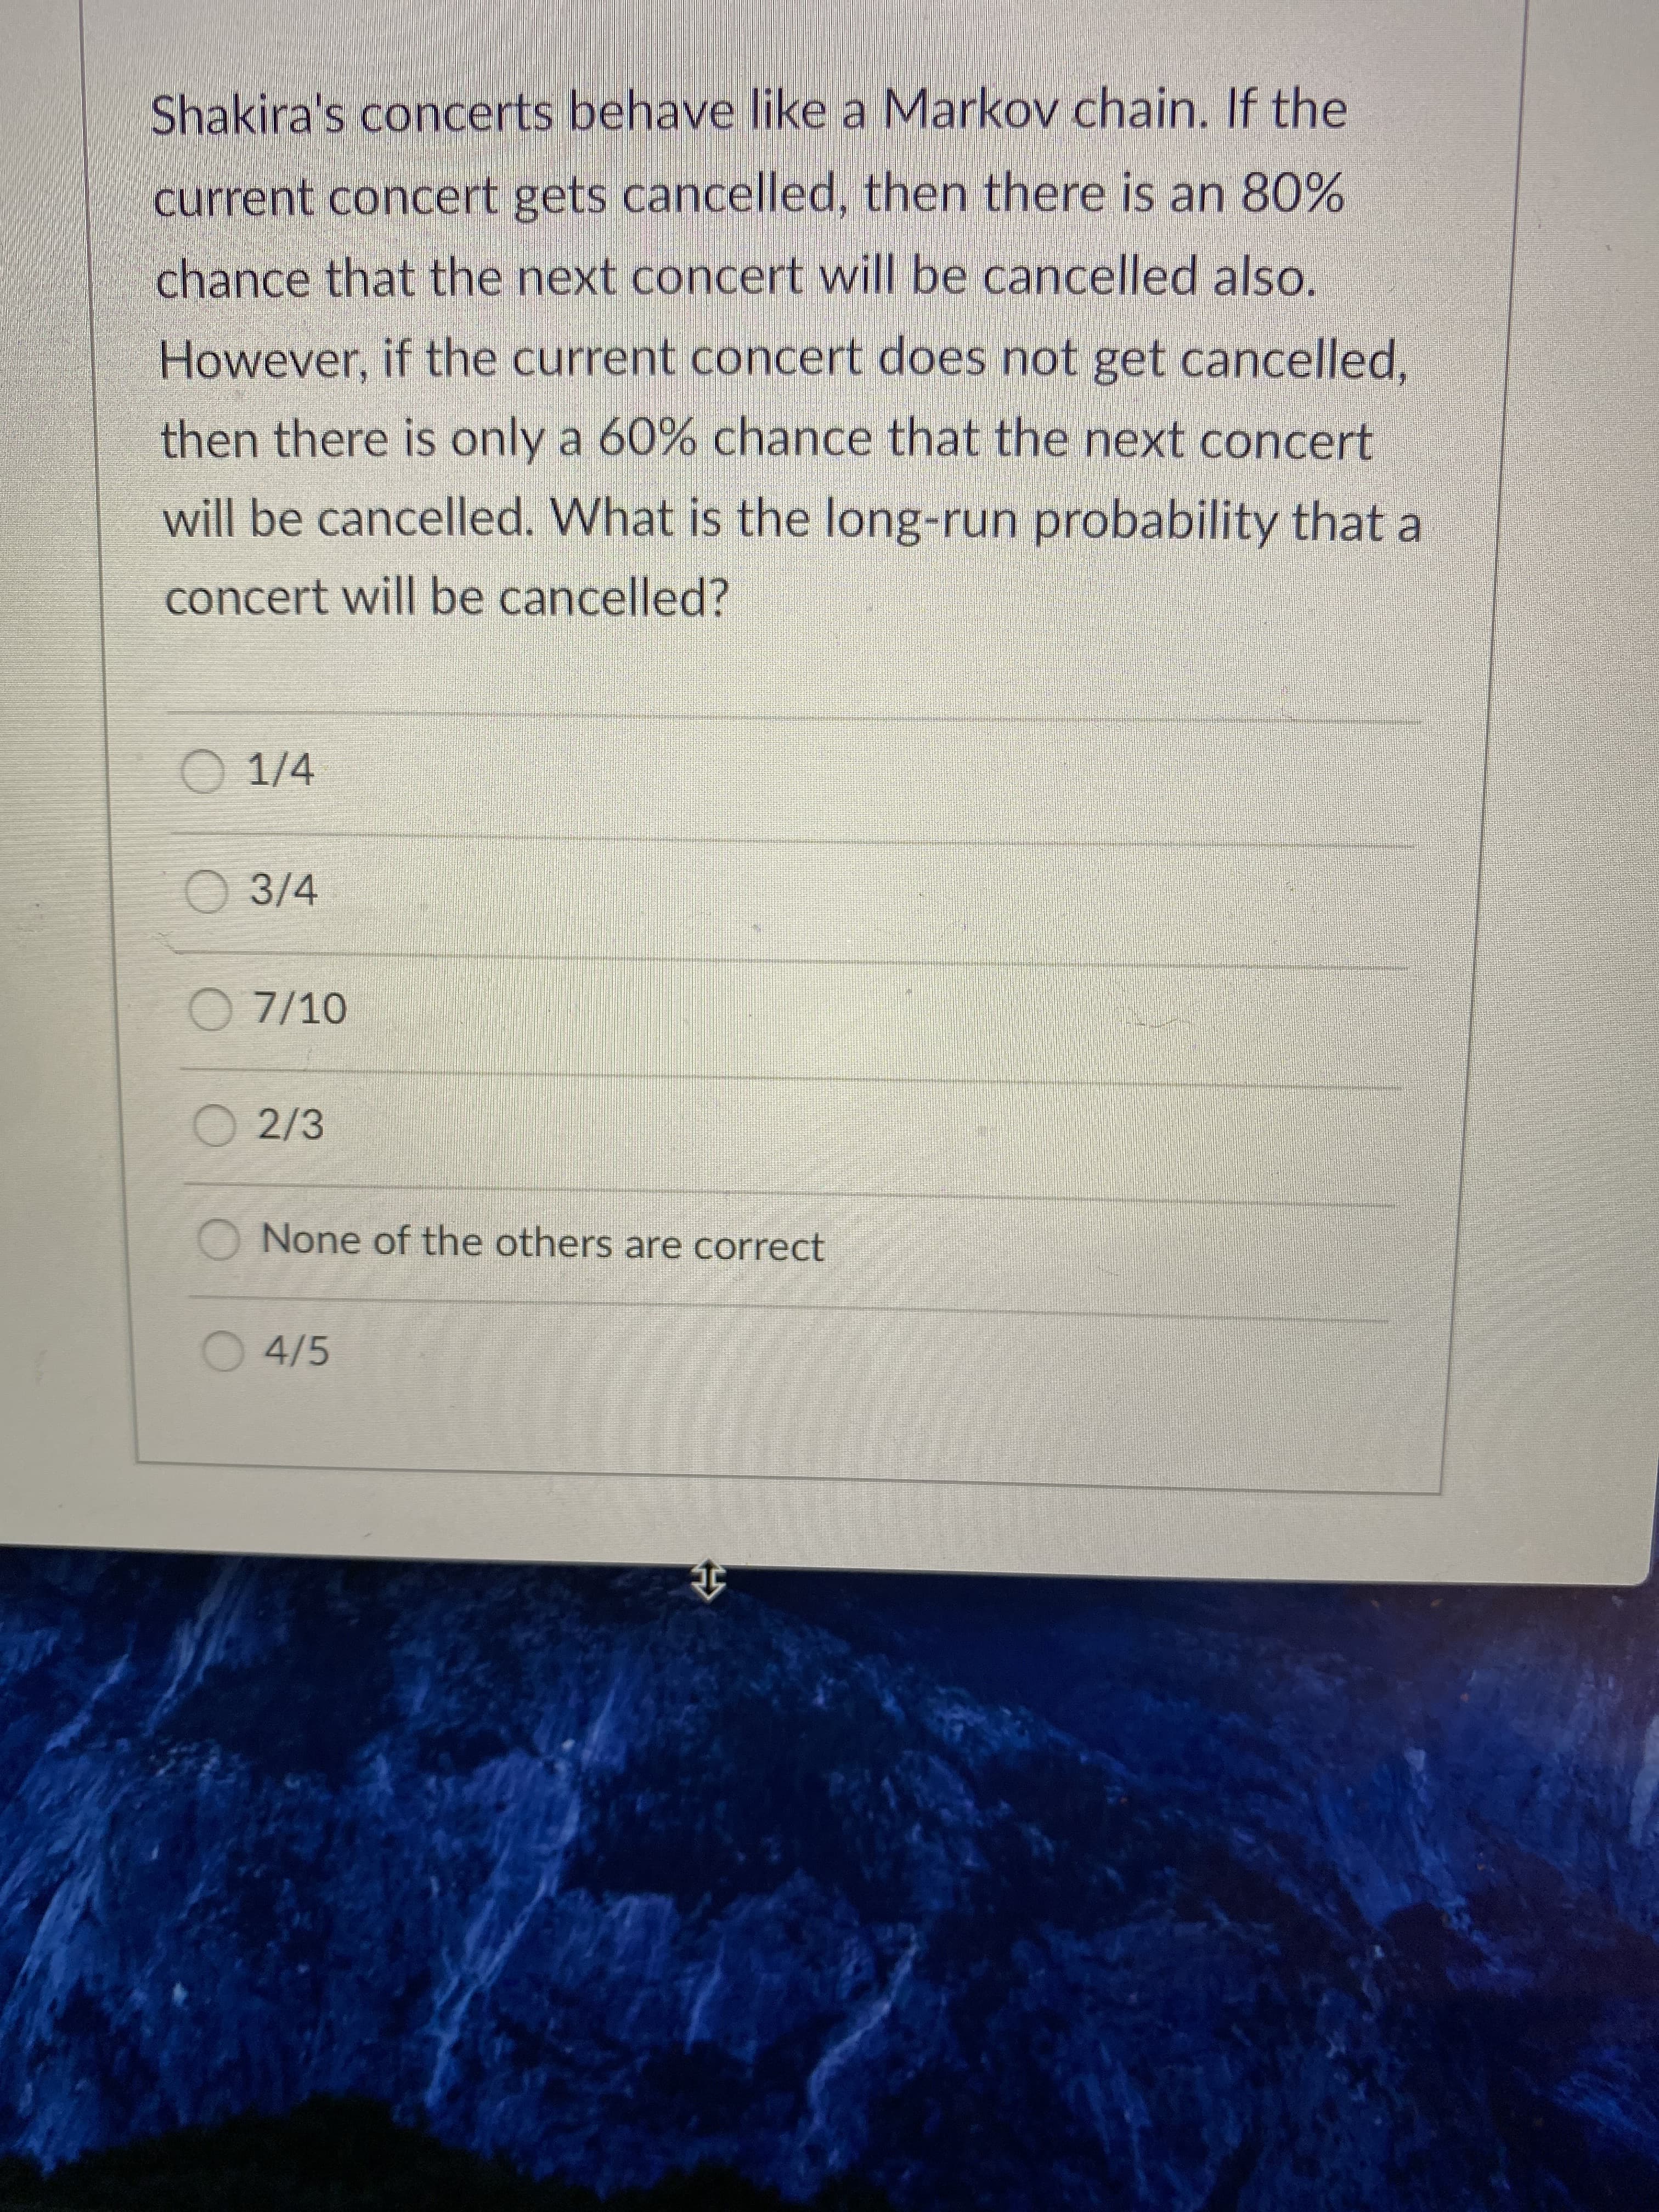 Shakira's concerts behave like a Markov chain. If the
current concert gets cancelled, then there is an 80%
